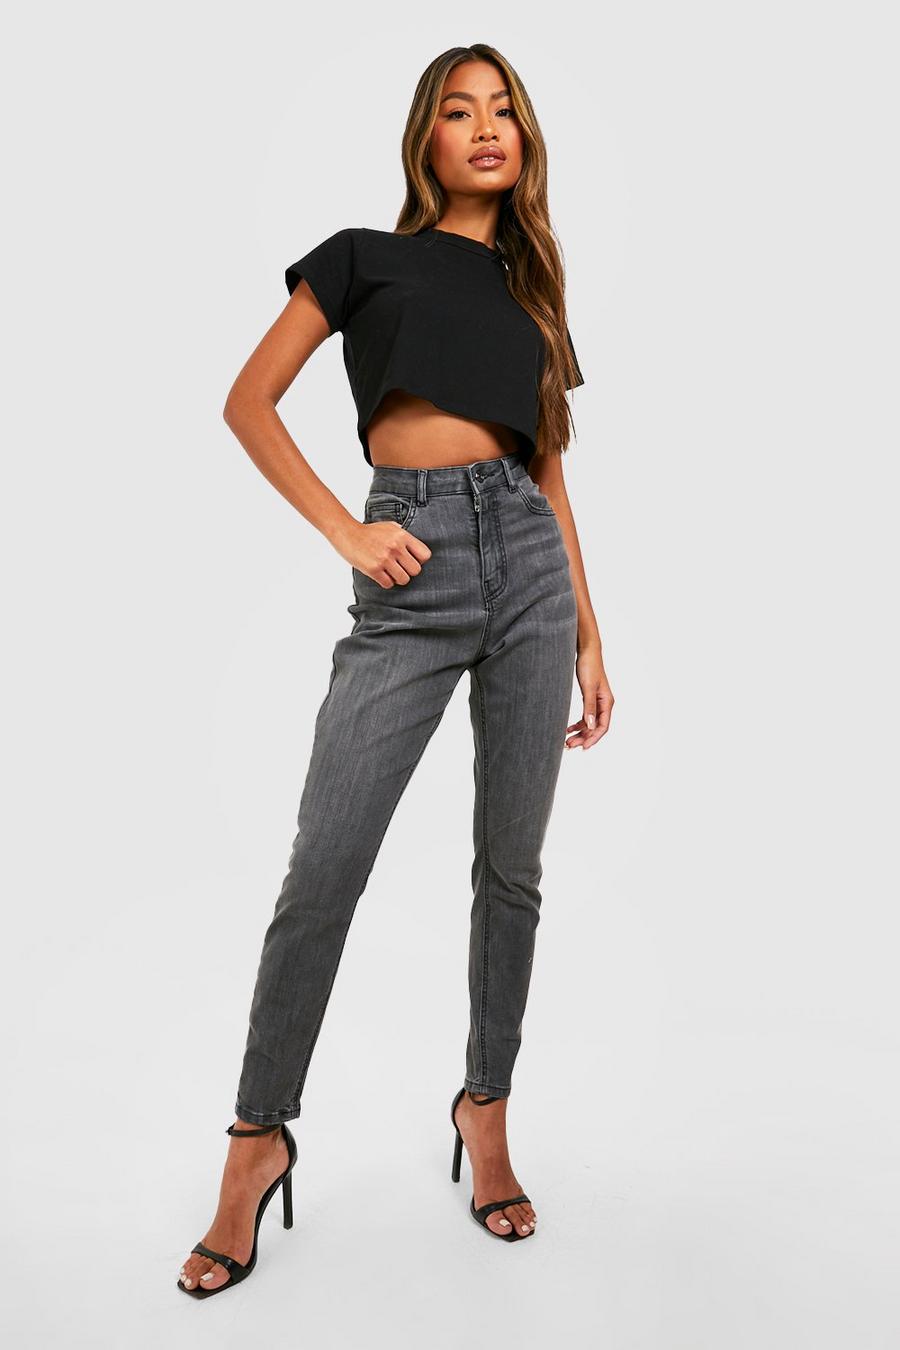 Butt Shaper High Waisted Washed Black Skinny Jeans